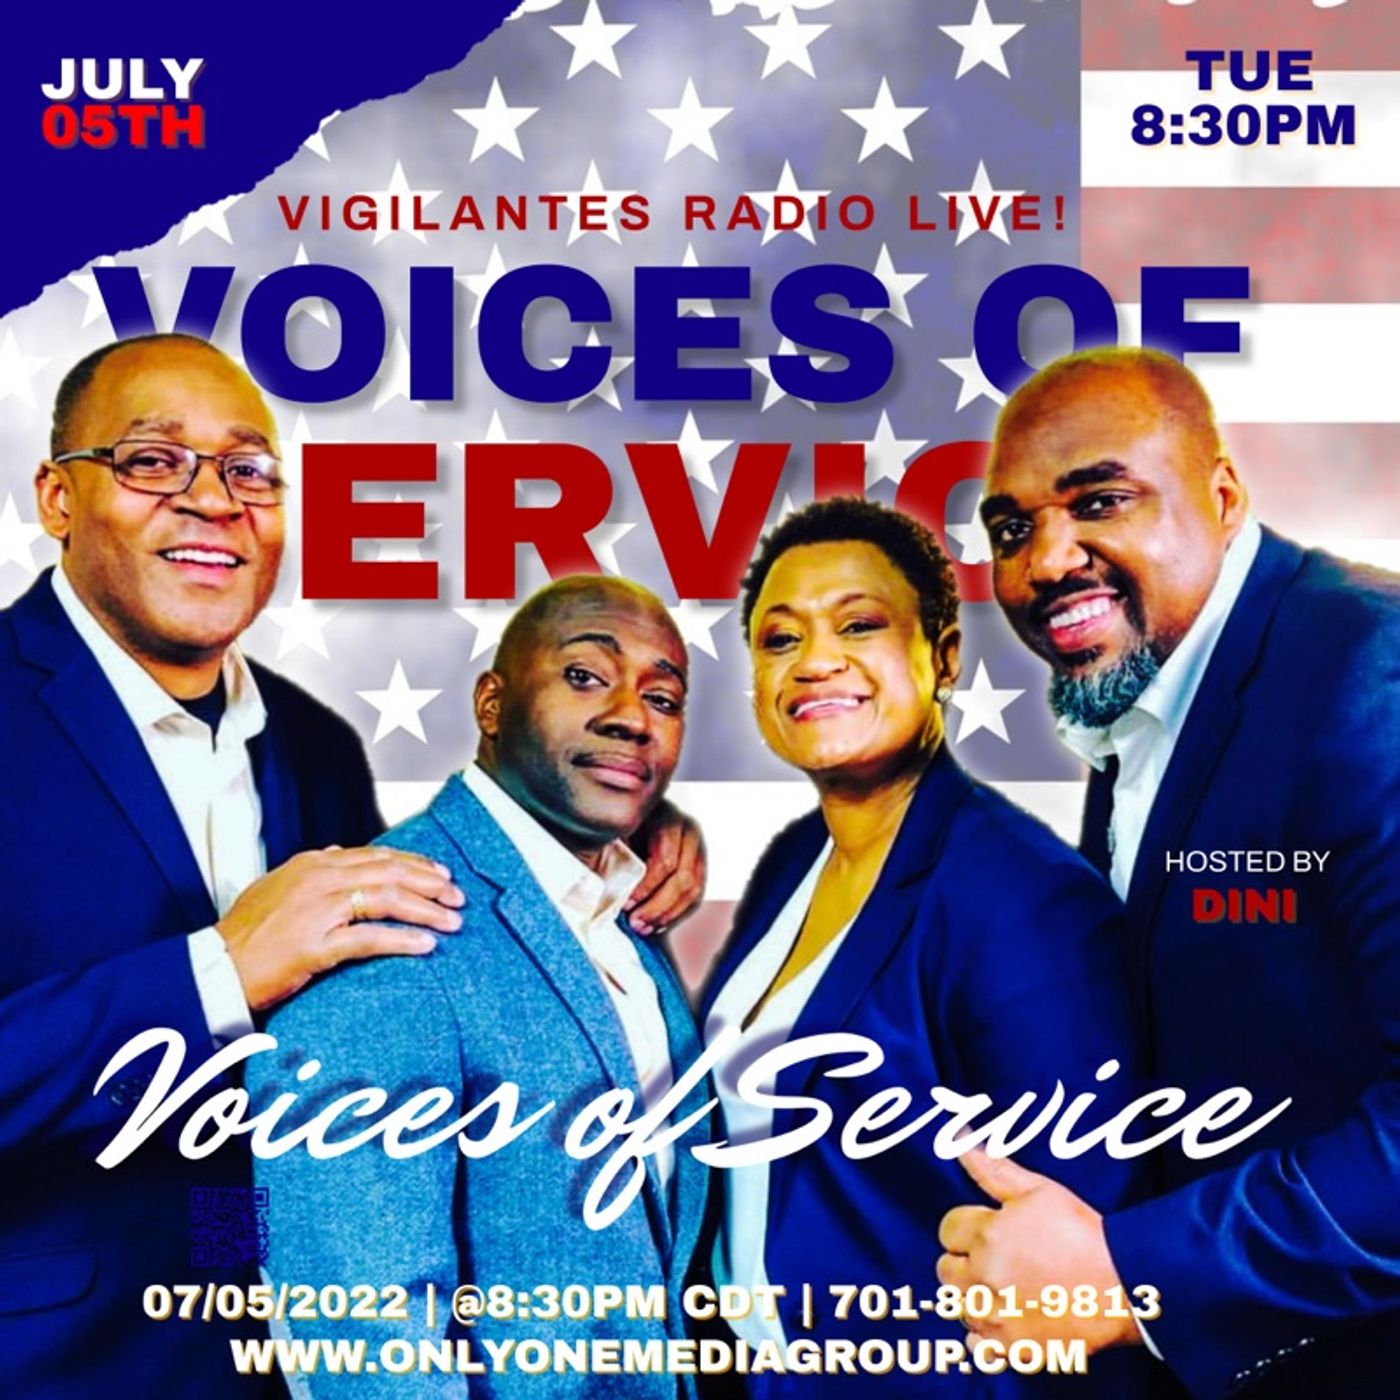 The Voices of Service Interview. Image